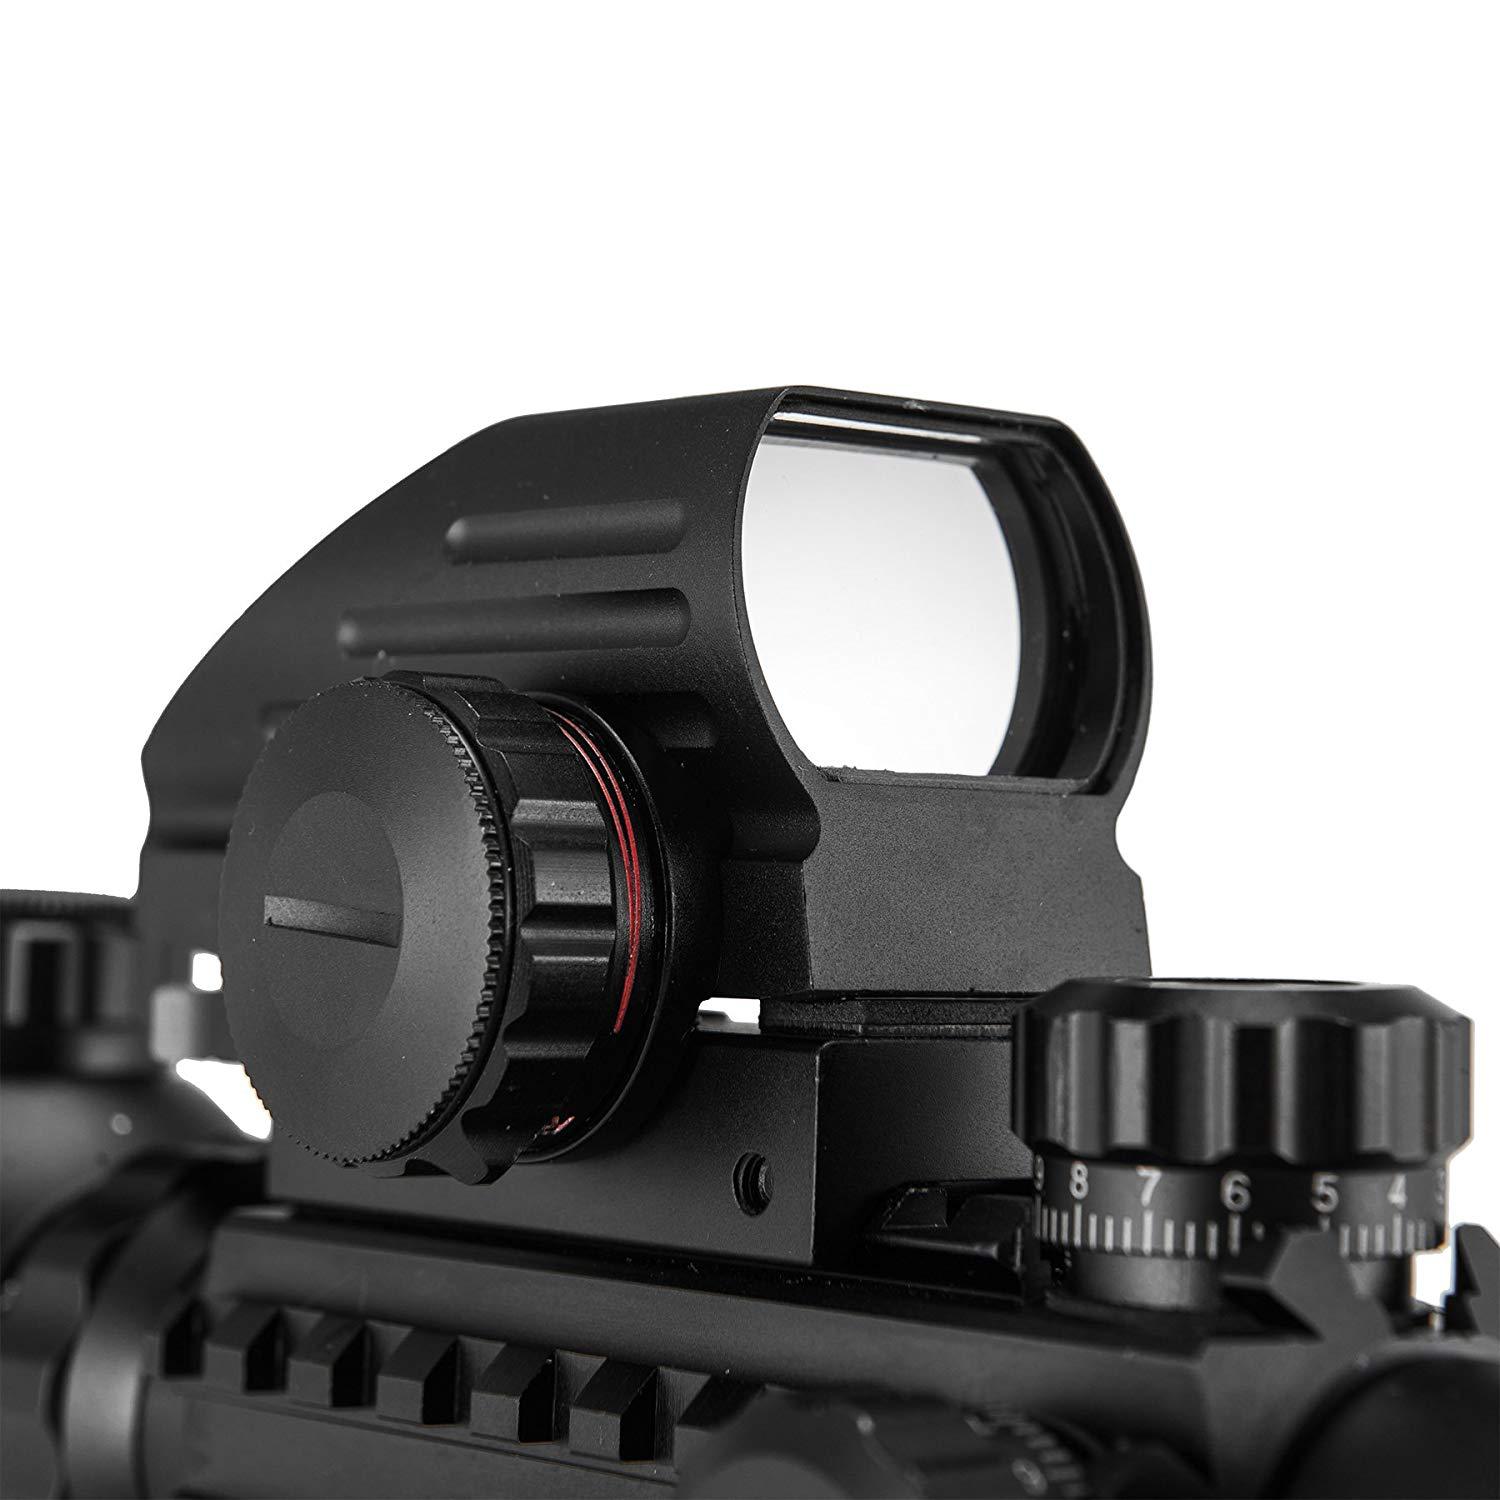 Pinty 3-in-1 Rifle Scope 4-12x50mmEG Rangefinder/Tactical Reticle Scope/Laser Sight & Red Dot Sight-sig sauer scopes 